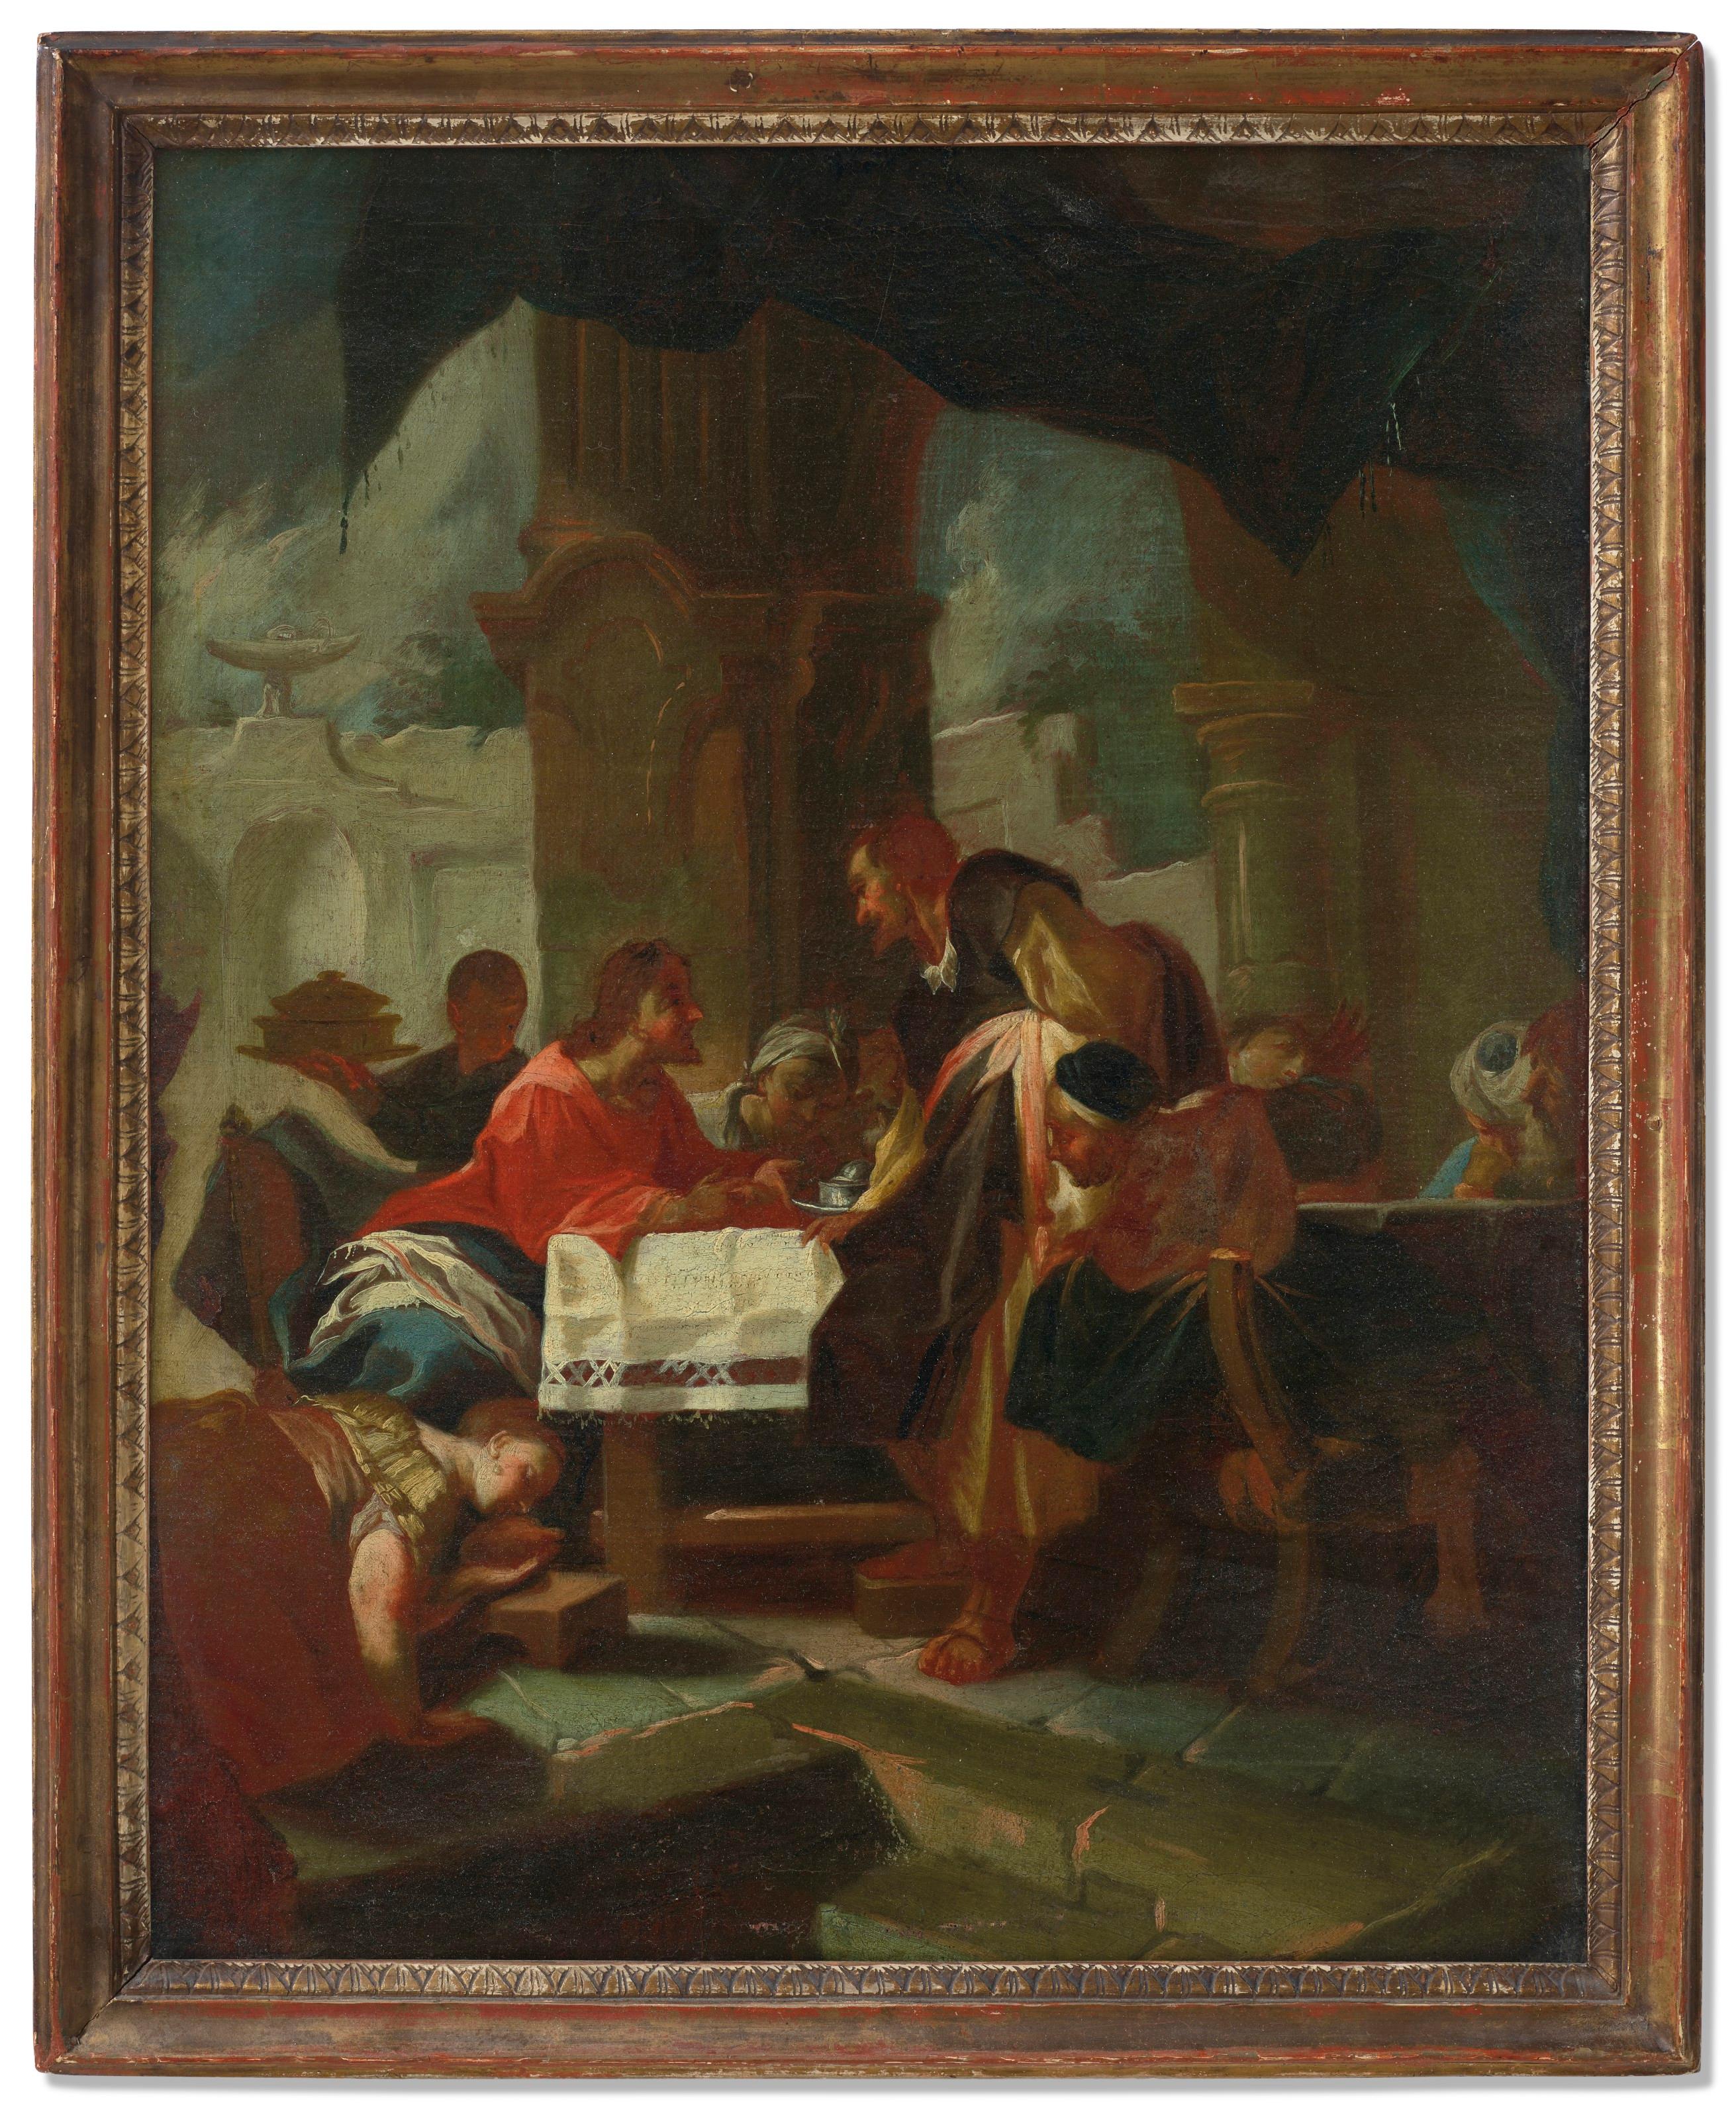 Our extraordinary paintings, attributed to Franz Xavier Karl Palko (1724-1767) depict Christ in the house of Simon the Pharisee, and Christ and the children of Zebedee.  Stretchers 18 1/8 by 22 7/8 inches.

Literature:
* E. Baum, Katalog des